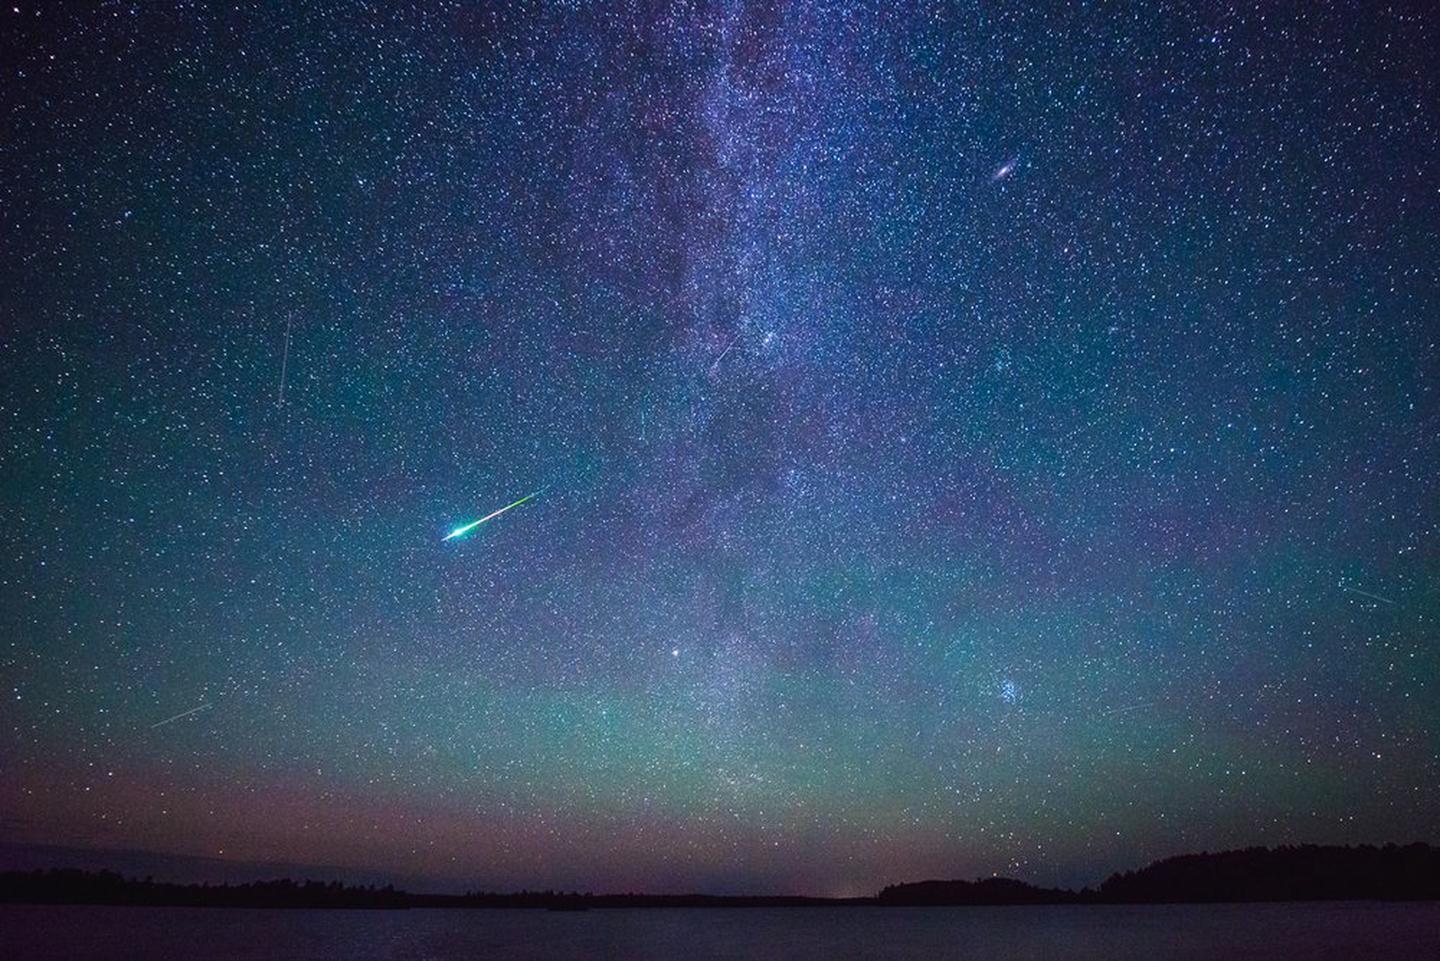 The Perseid meteor shower and Milky Way galaxy against a dark starry sky at Voyageurs